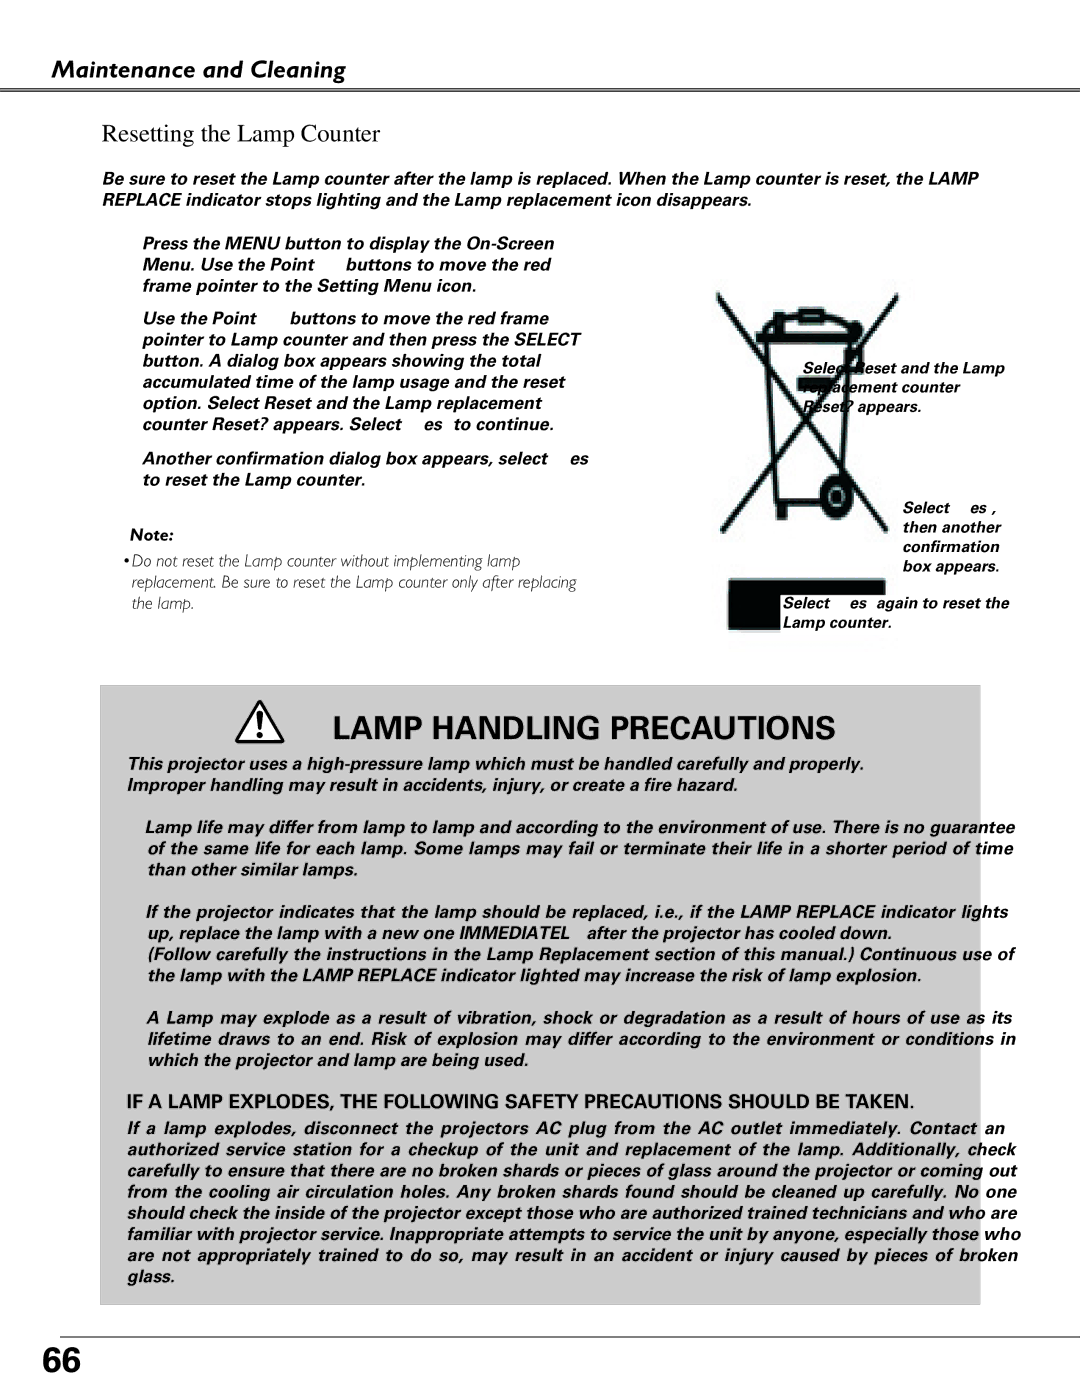 Eiki LC-XB40N owner manual Lamp Handling Precautions, Maintenance and Cleaning Resetting the Lamp Counter 